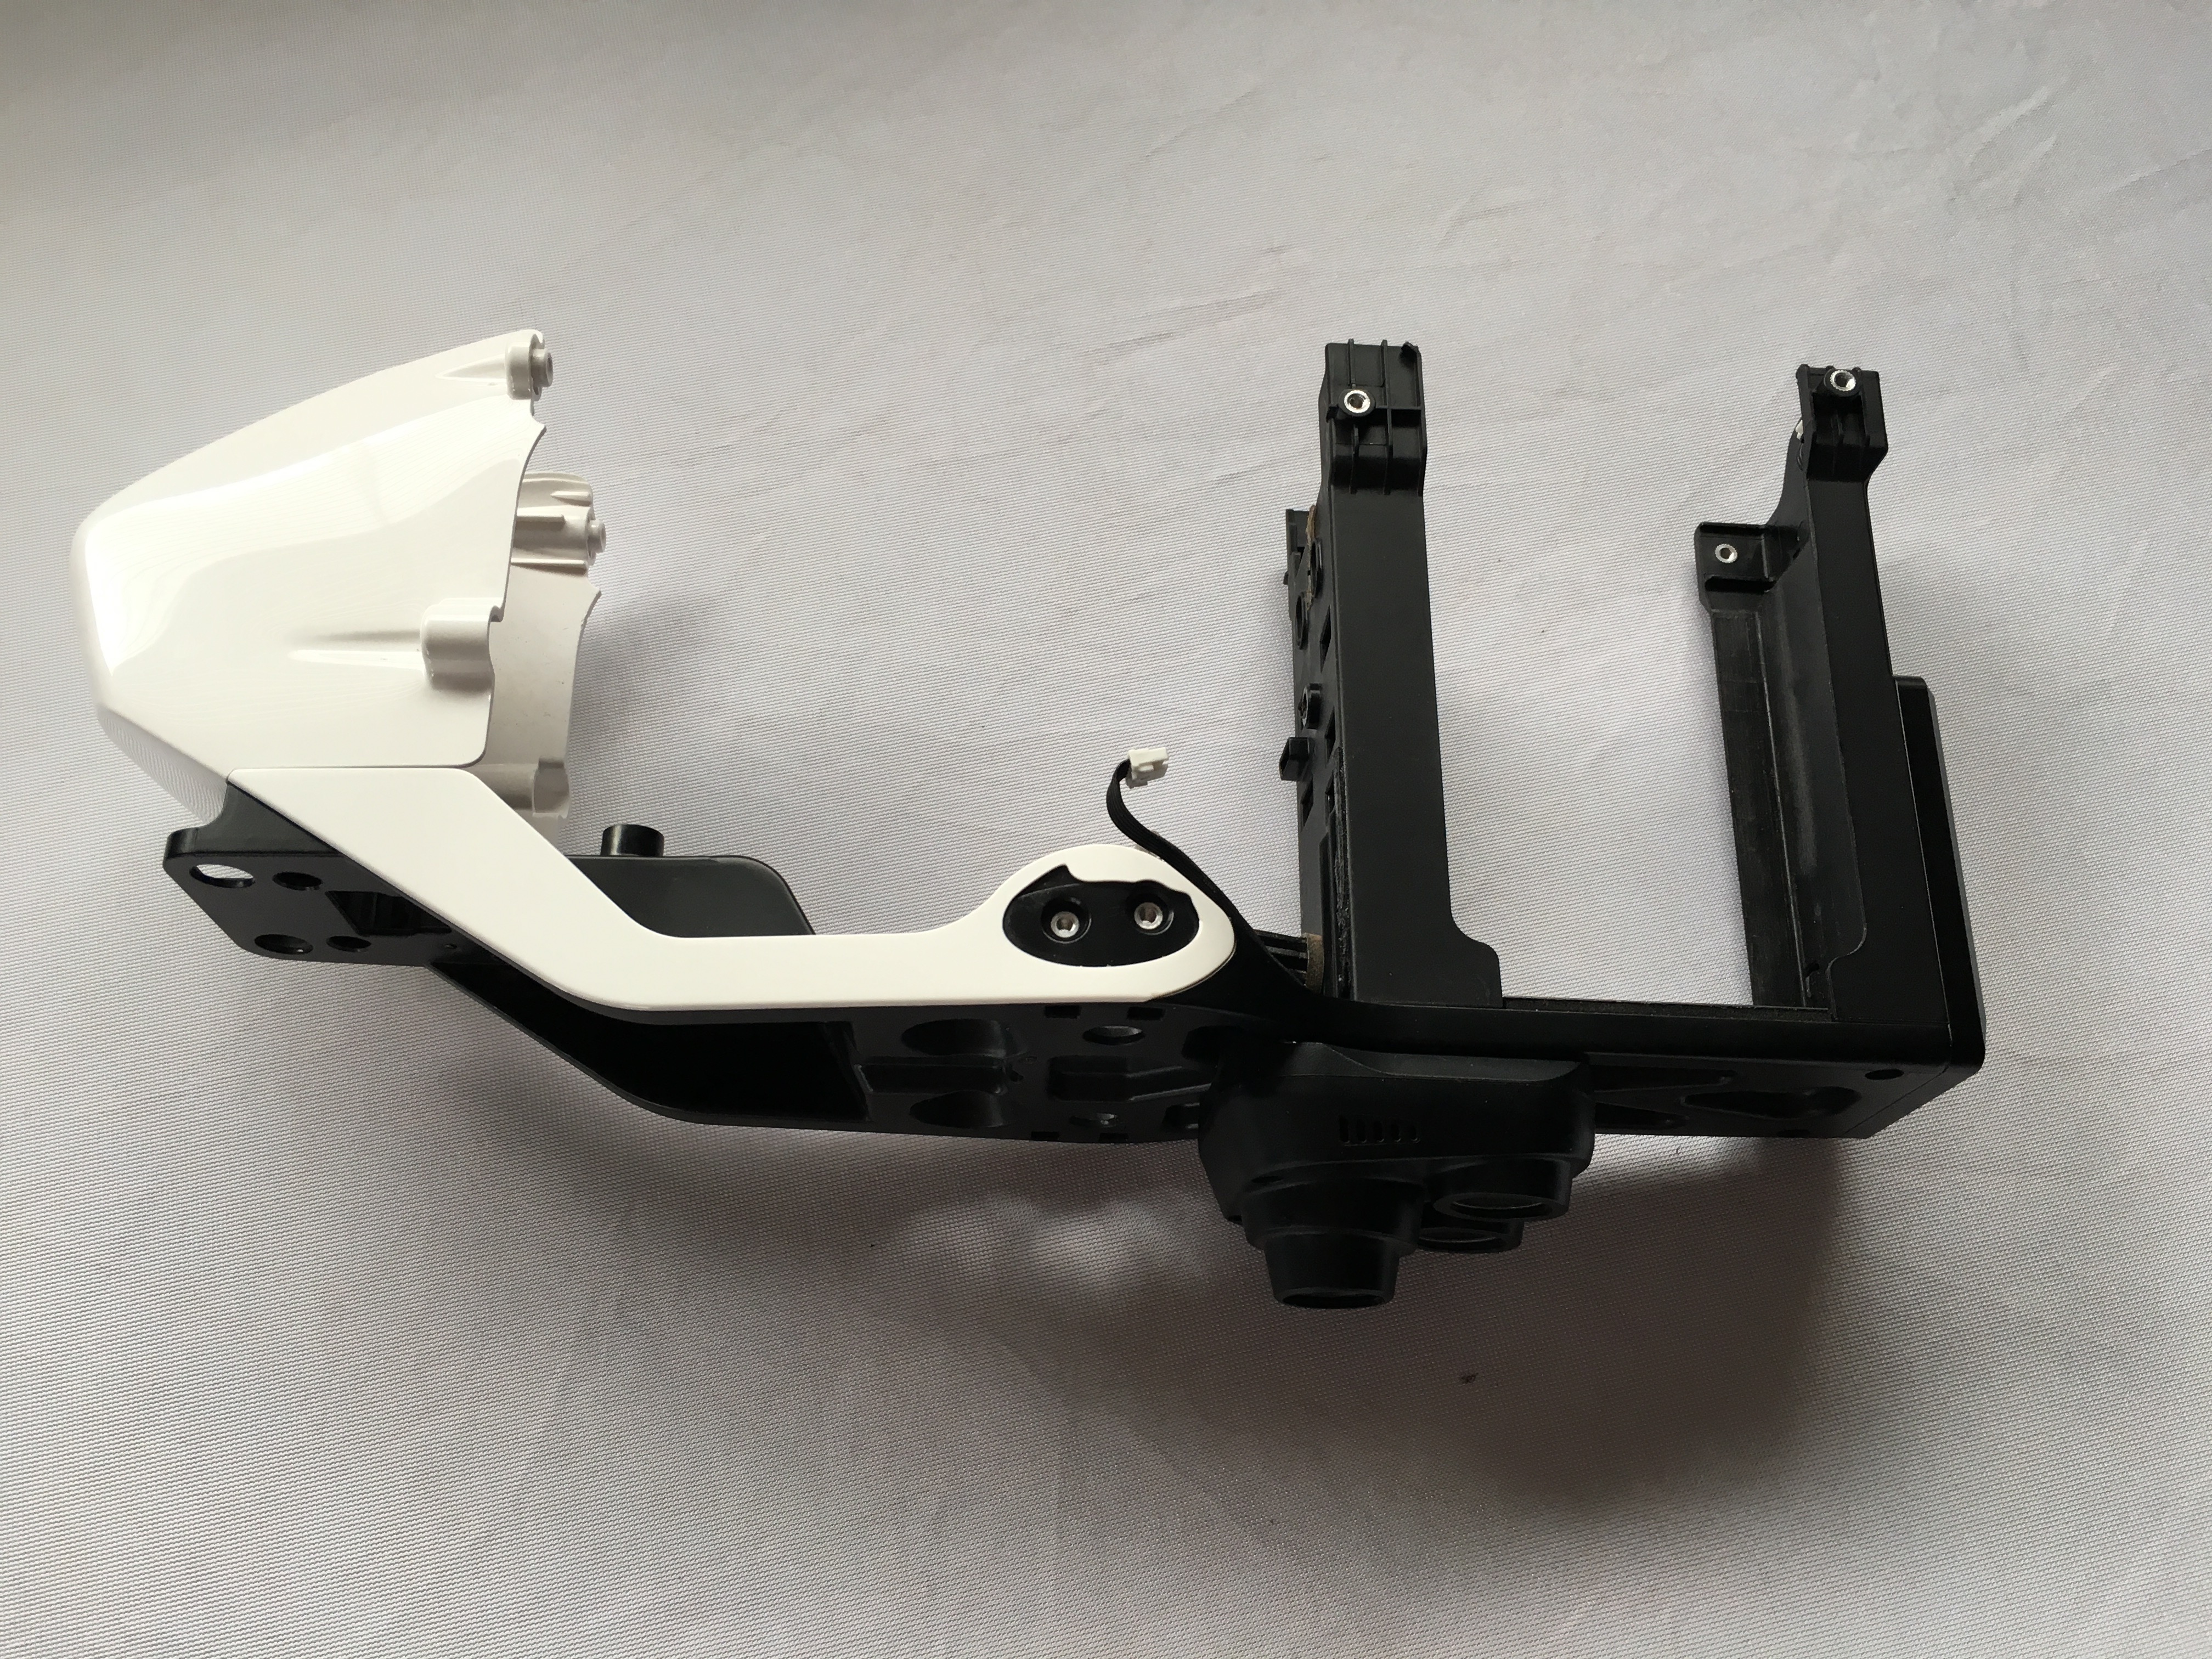 Airframe Bottom Cover Details about   DJI Inspire 1 Part 37